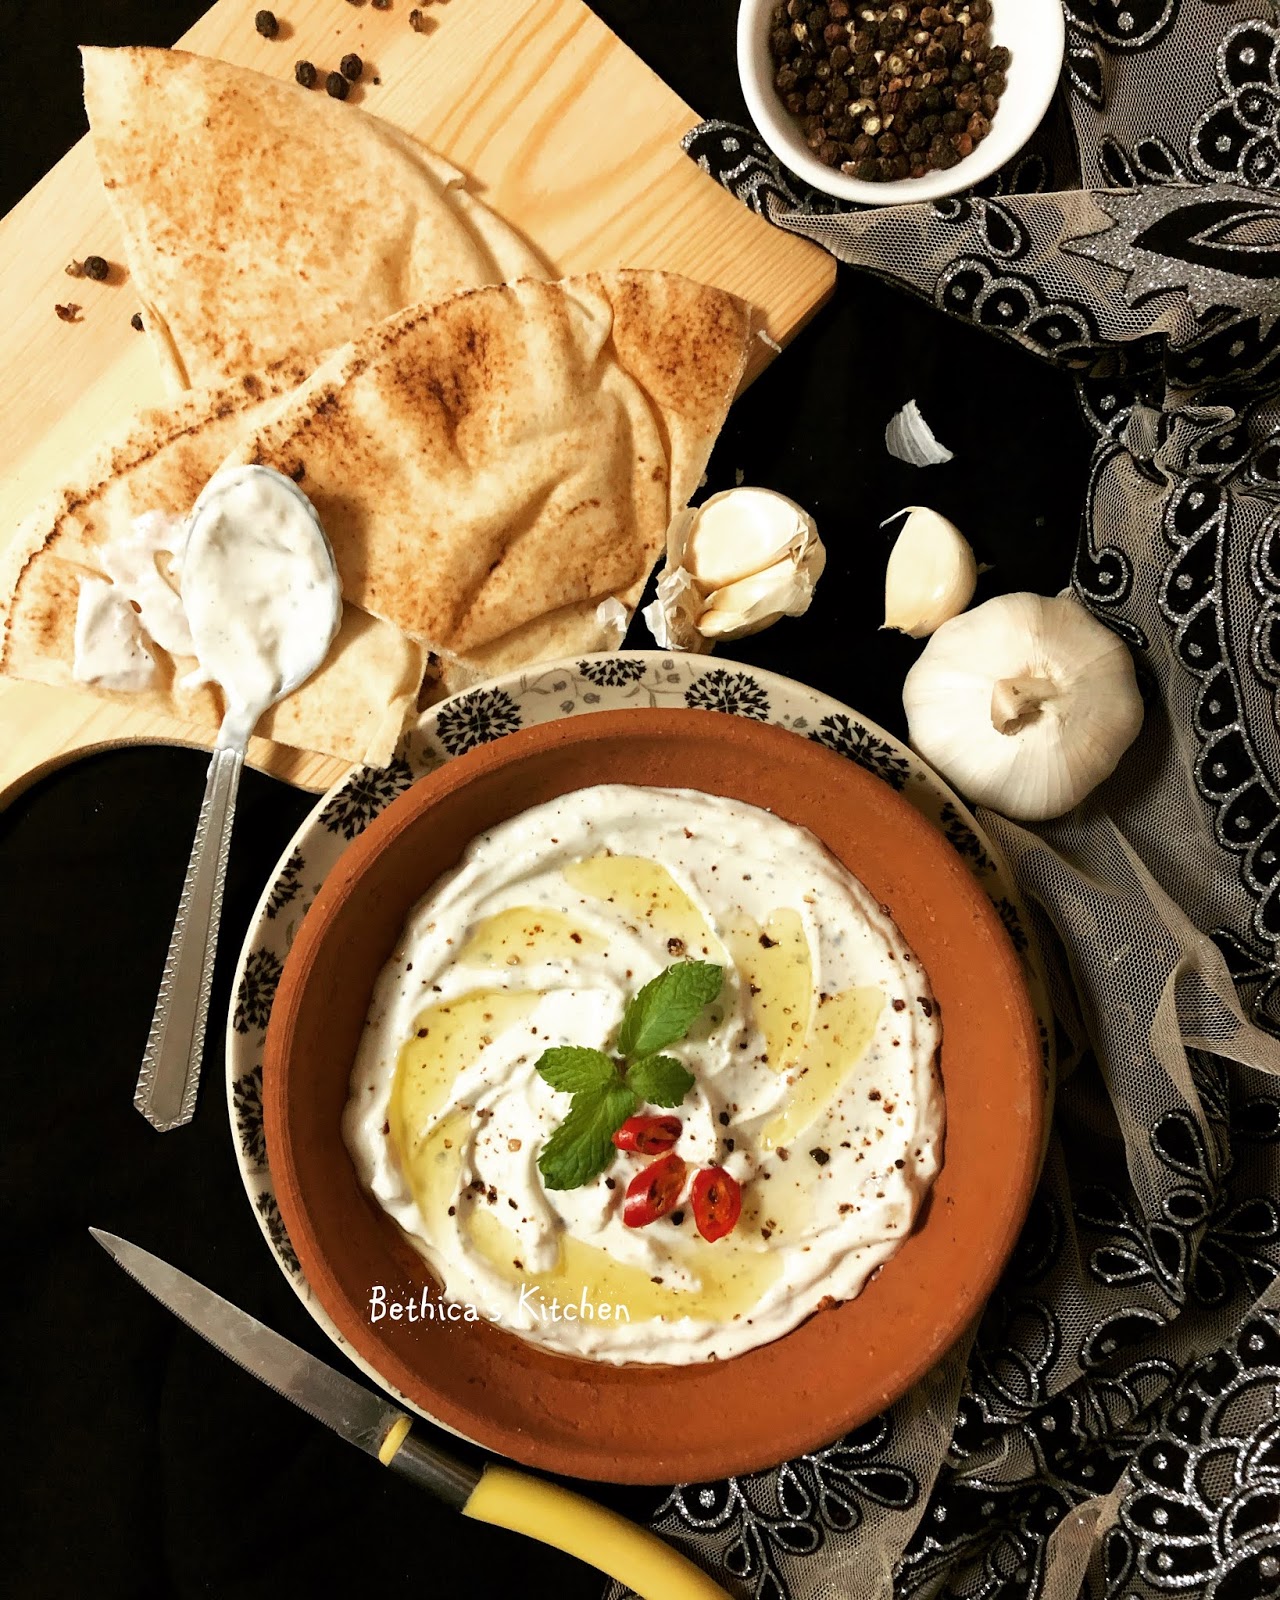 Bethica's Kitchen Flavours: Garlic Pepper Labneh (Middle Eastern Dip)